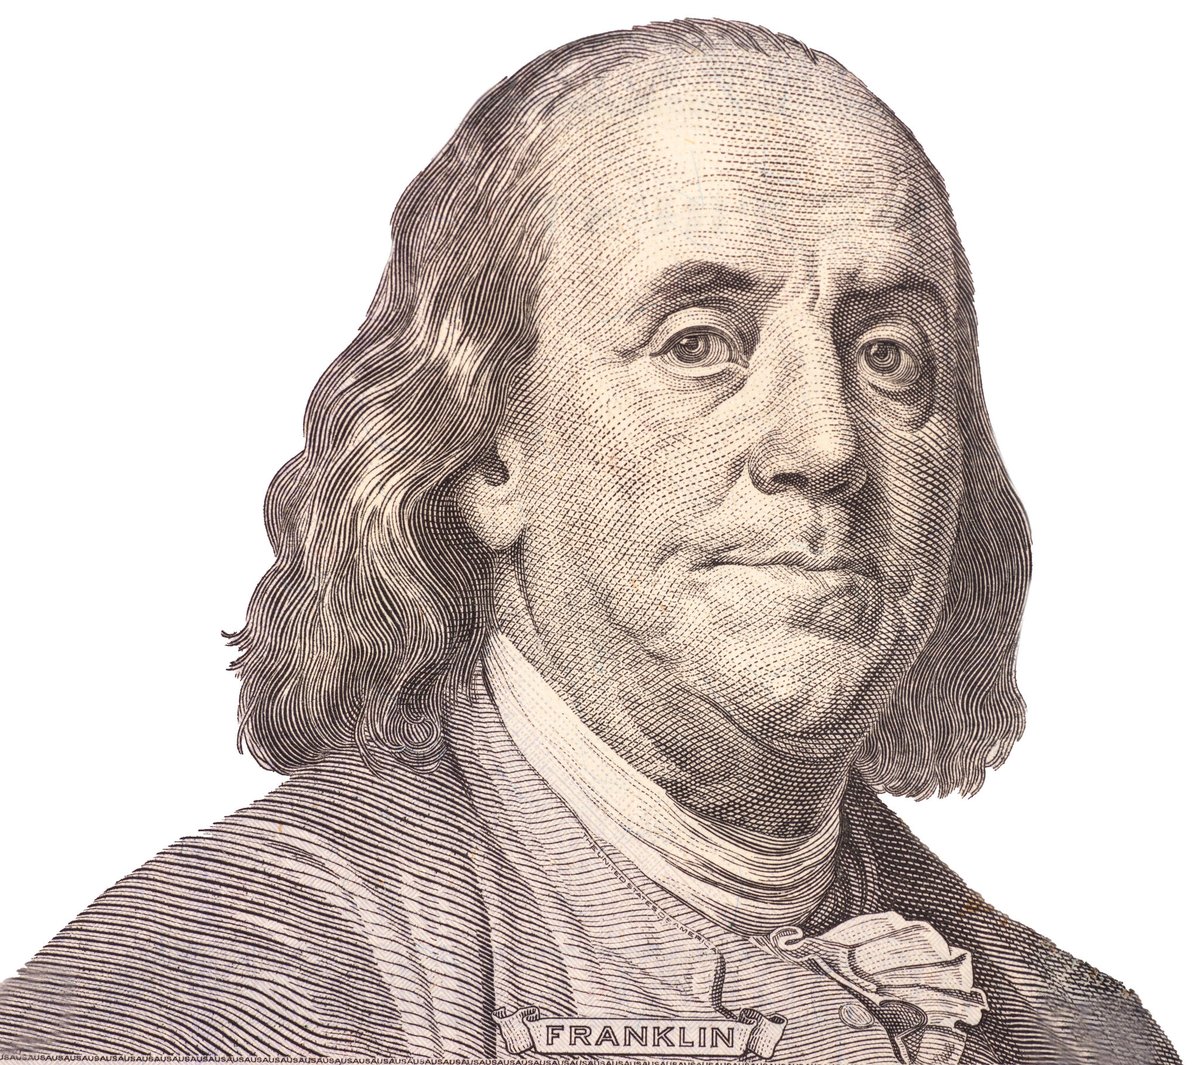 Today is #BenjaminFranklin's birthday. He was dedicated to the craft as an active #Mason for 60 years. We are honored that we may call this incredibly influential #FoundingFather “Brother.”